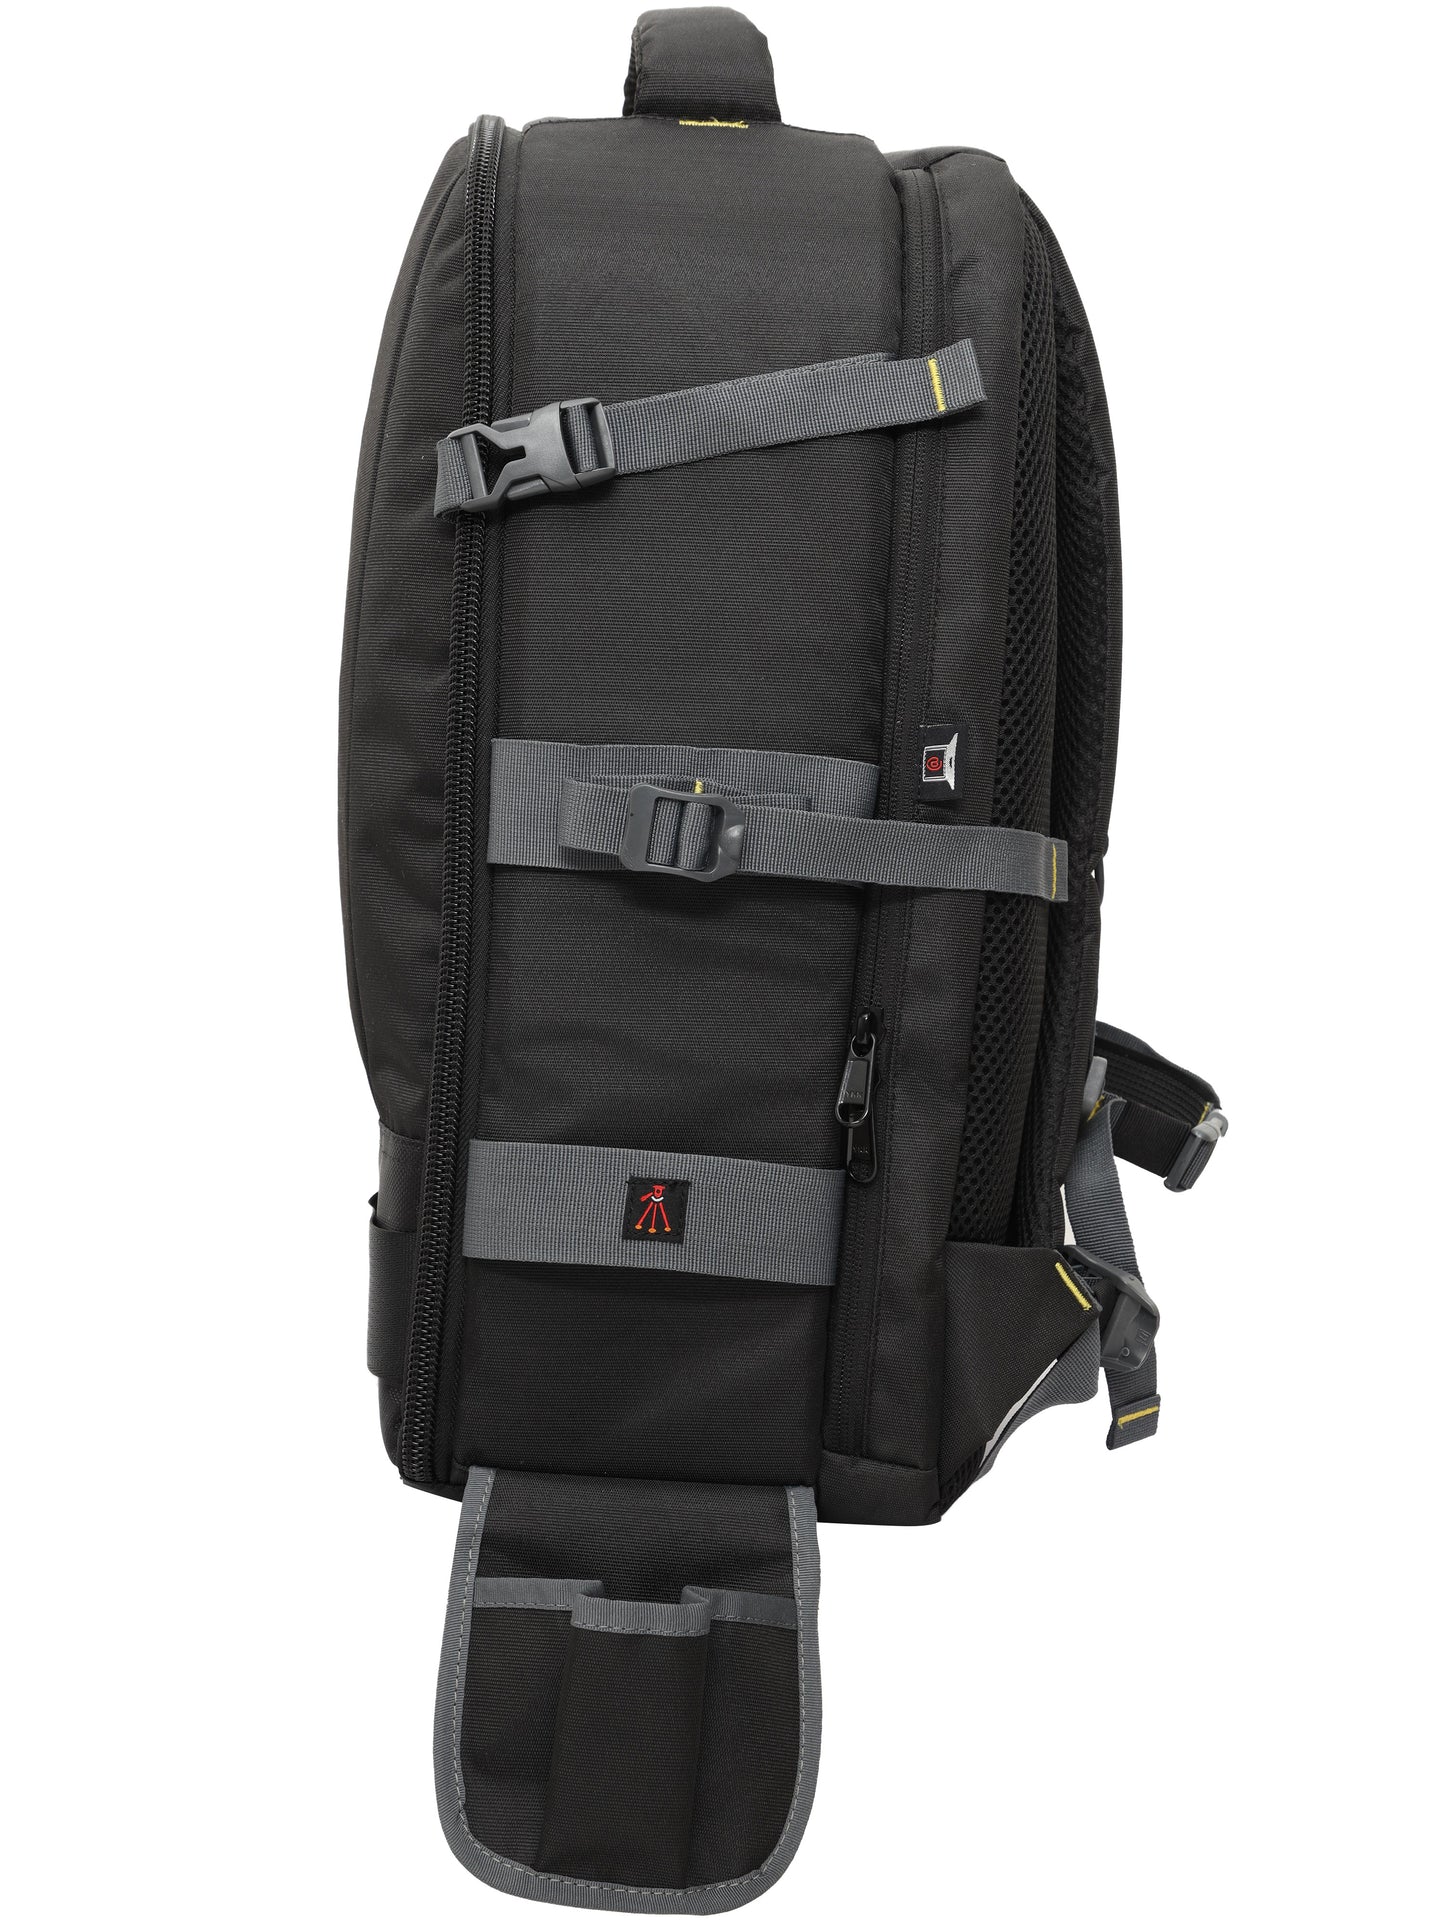 Other side view of the G12 Target DSLR camera bag, showcasing the integrated tripod holder. The tripod holder is ingeniously designed to neatly fold into the bag when not in use, providing a compact and streamlined profile for effortless portability